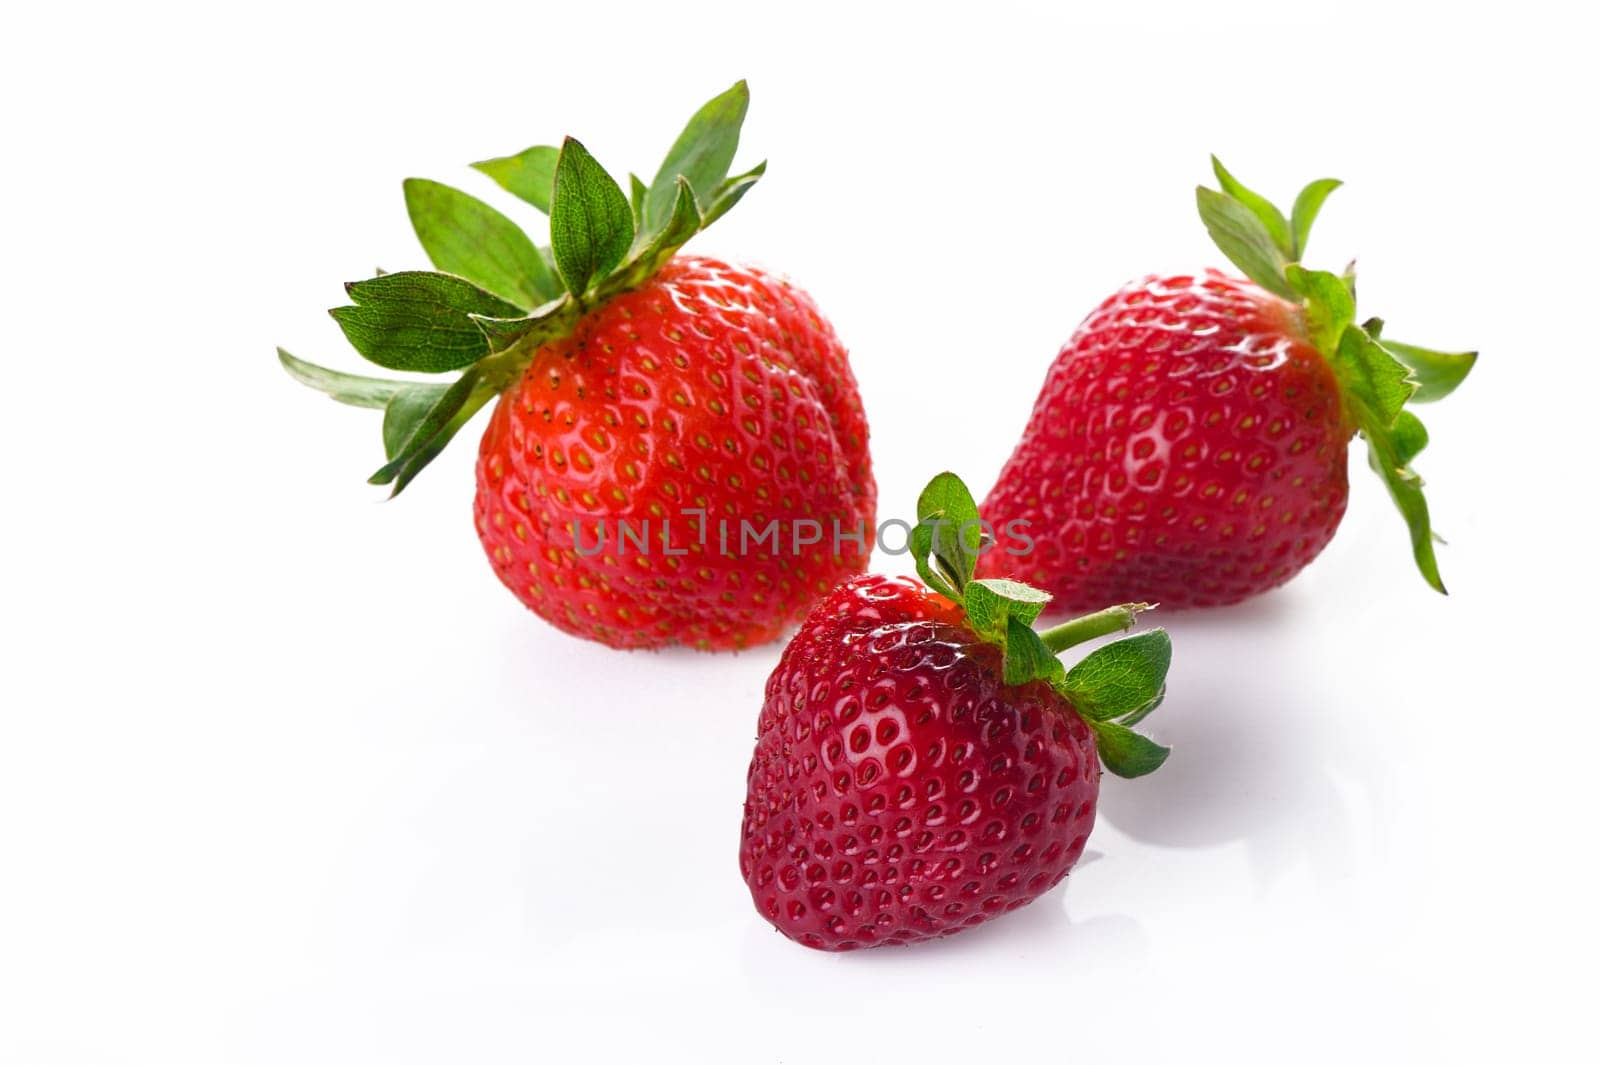 Set of ripe strawberries. Whole and cut berries isolated on white background. by Mixa74